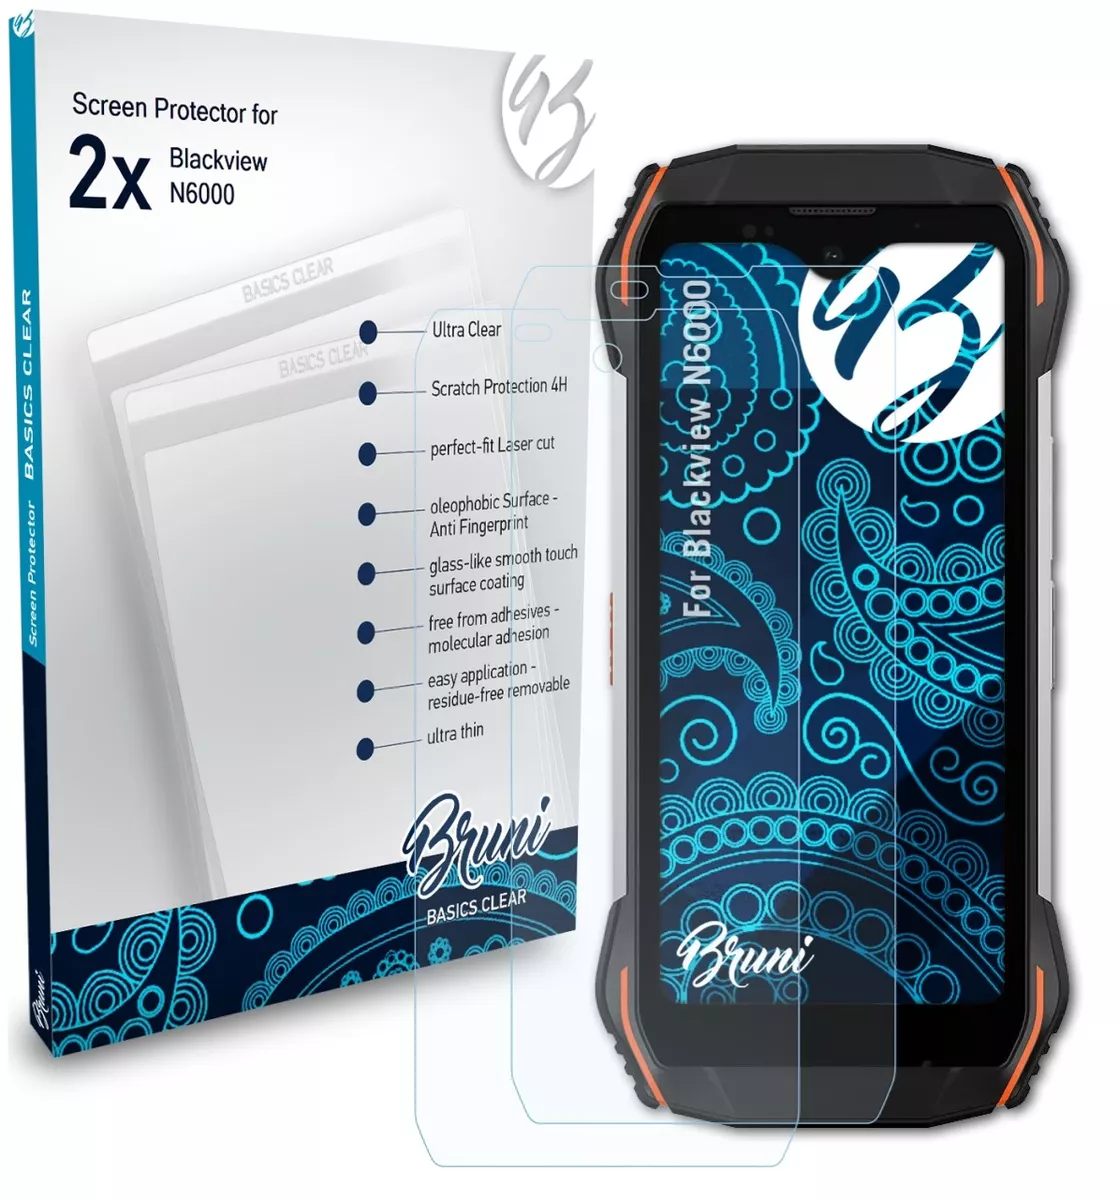 Bruni 2x Protective Film for Blackview N6000 Screen Protector